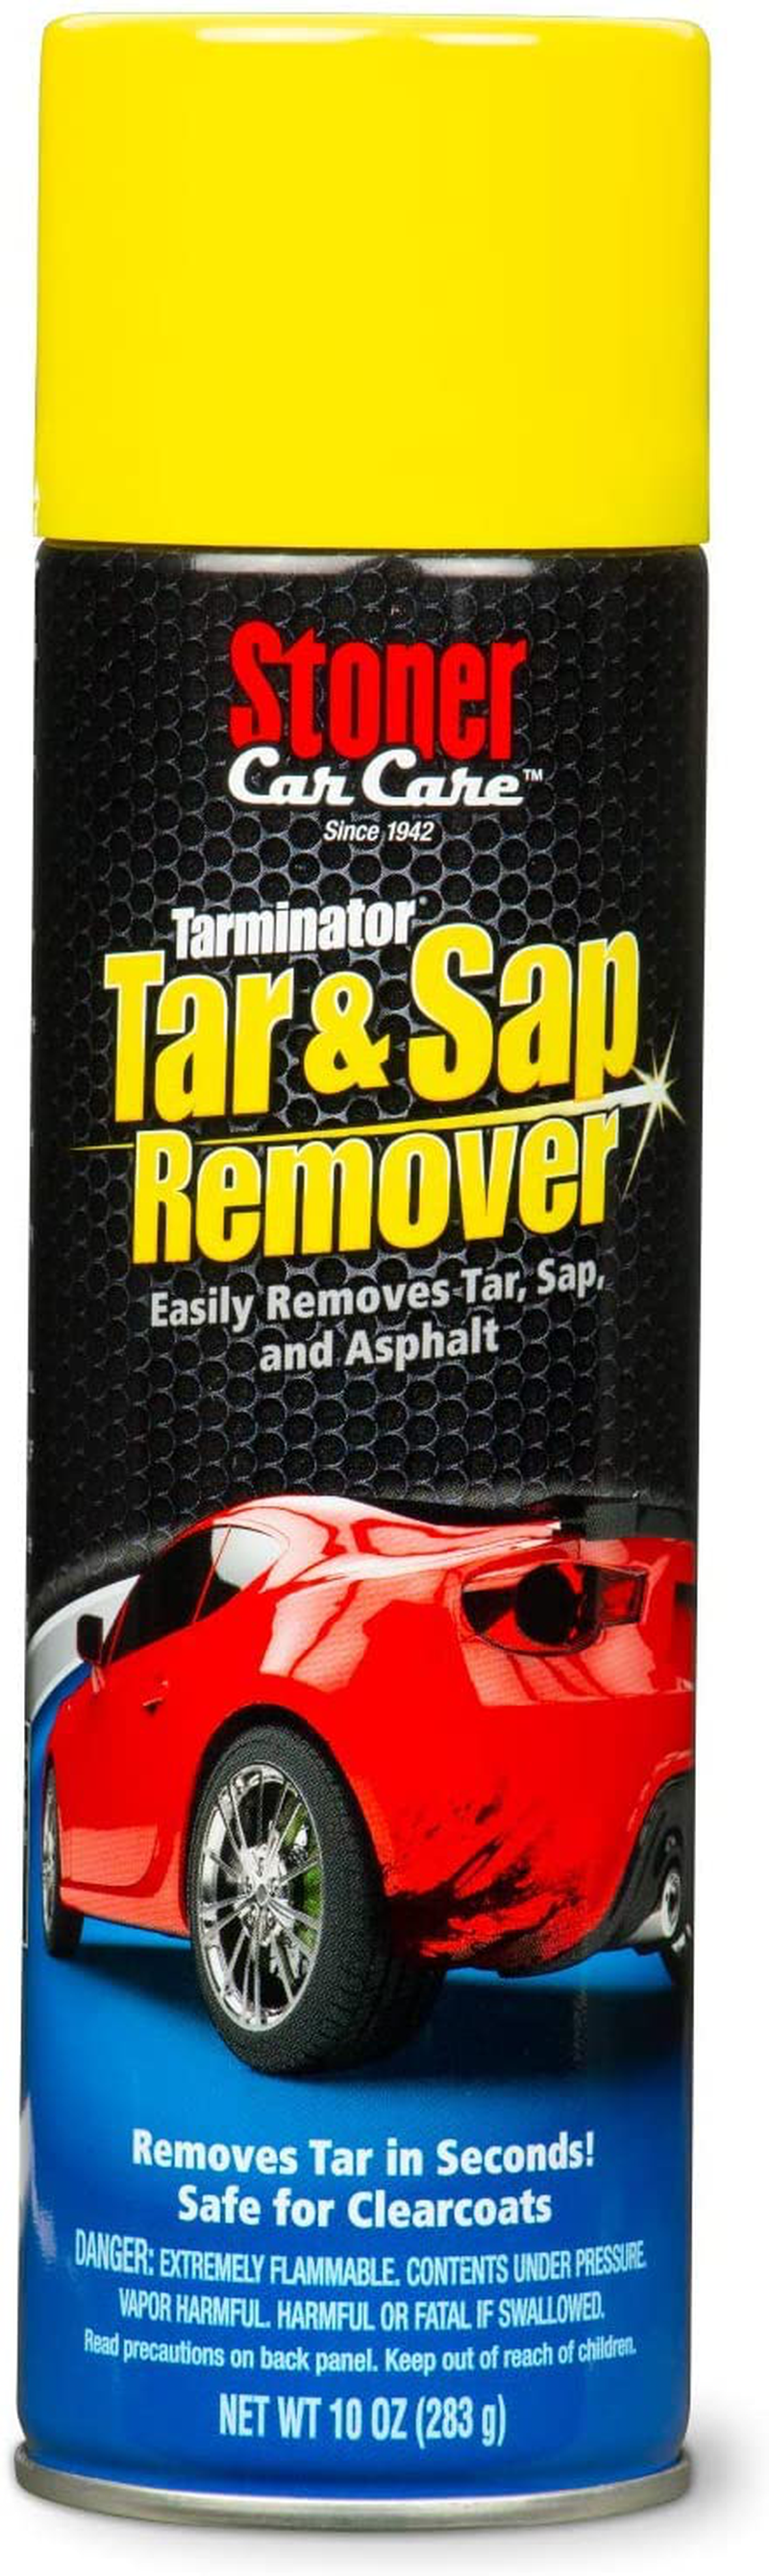 Stoner Car Care 91154 10-Ounce Tarminator Tar, Sap, and Asphalt Remover Safe on Automotive Paint and Chrome on Cars, Trucks, RVs, Motorcycles, and Boats, Pack of 1  Stoner Car Care Pack of 1  